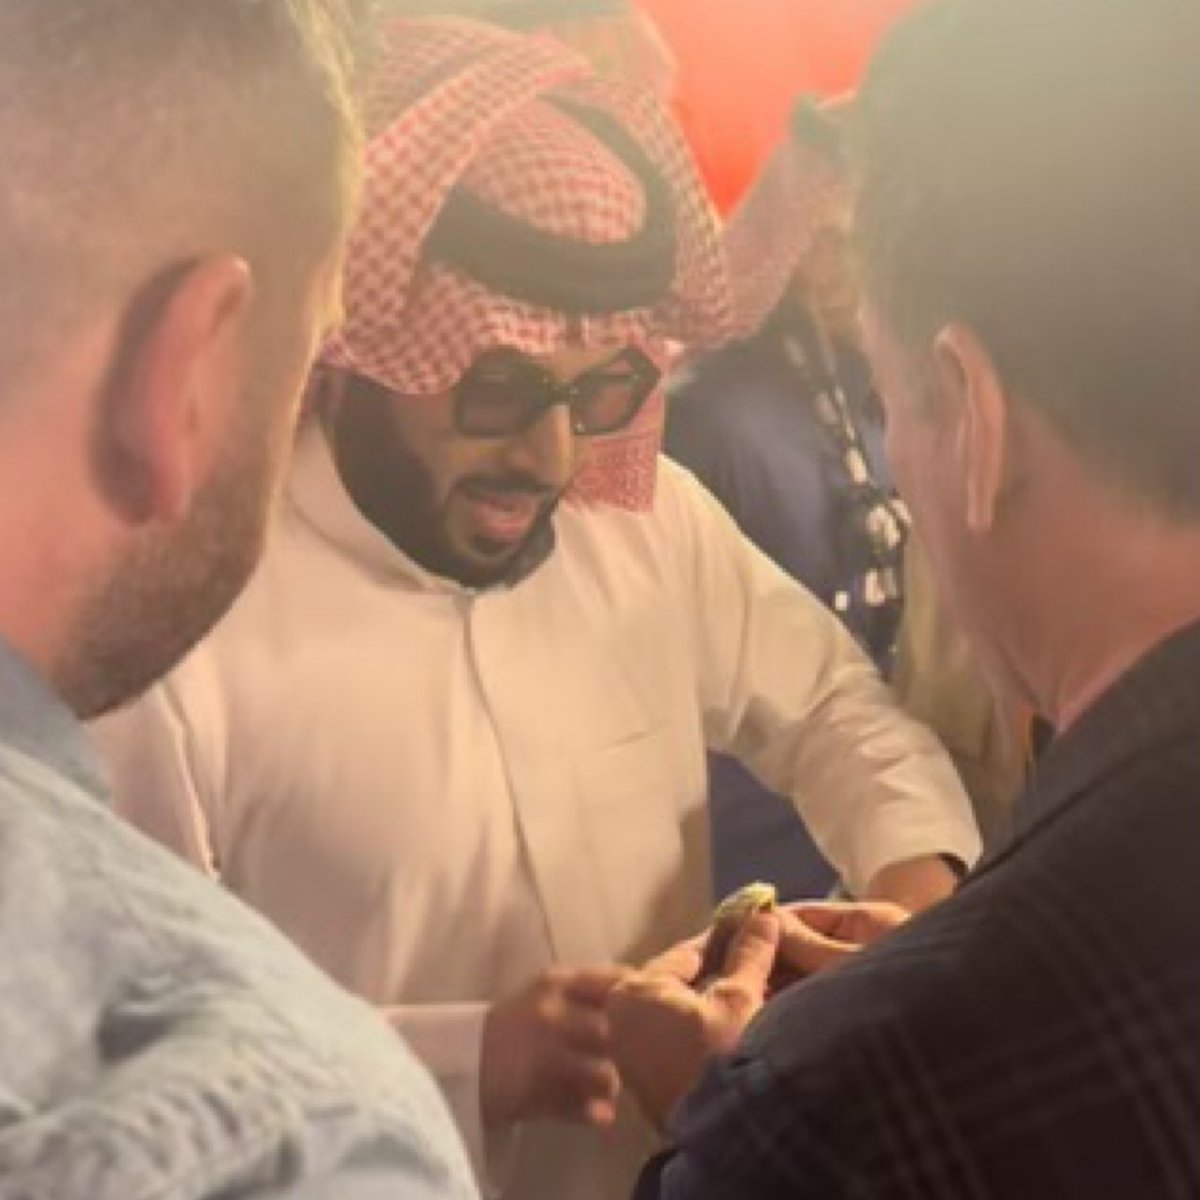 His Excellency @Turki_alalshikh displaying the first ever PFL Champs vs Bellator Champs Super Fight Ring #LetsGoFrancis